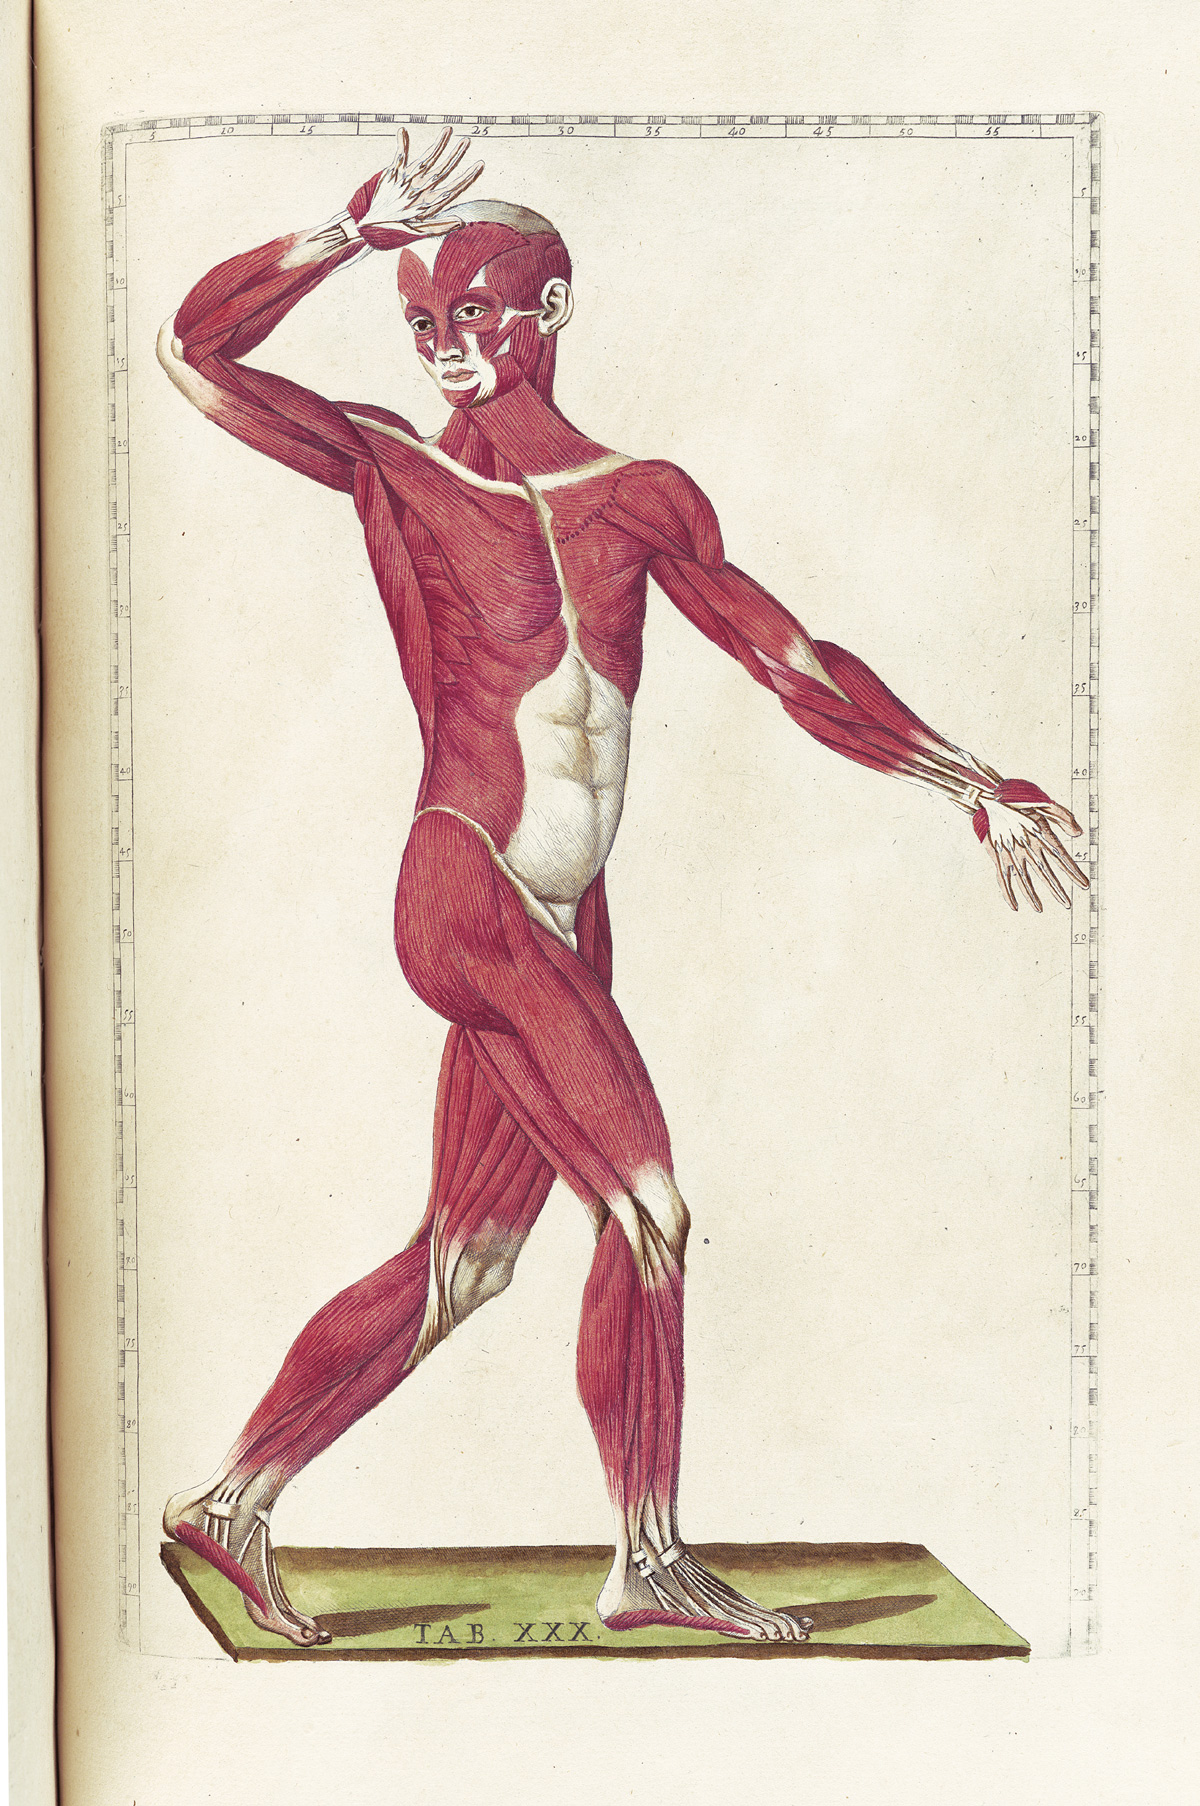 Hand-colored etching of a facing walking figure with flesh removed to expose the muscles; the figure is facing the viewer looking to the left side of the page with right arm raised and bent at the elbow and touching his forehead with palm out; from Bartholomeo Eustachi’s Tabulae anatomicae, NLM Call no.: WZ 260 E87t 1783.